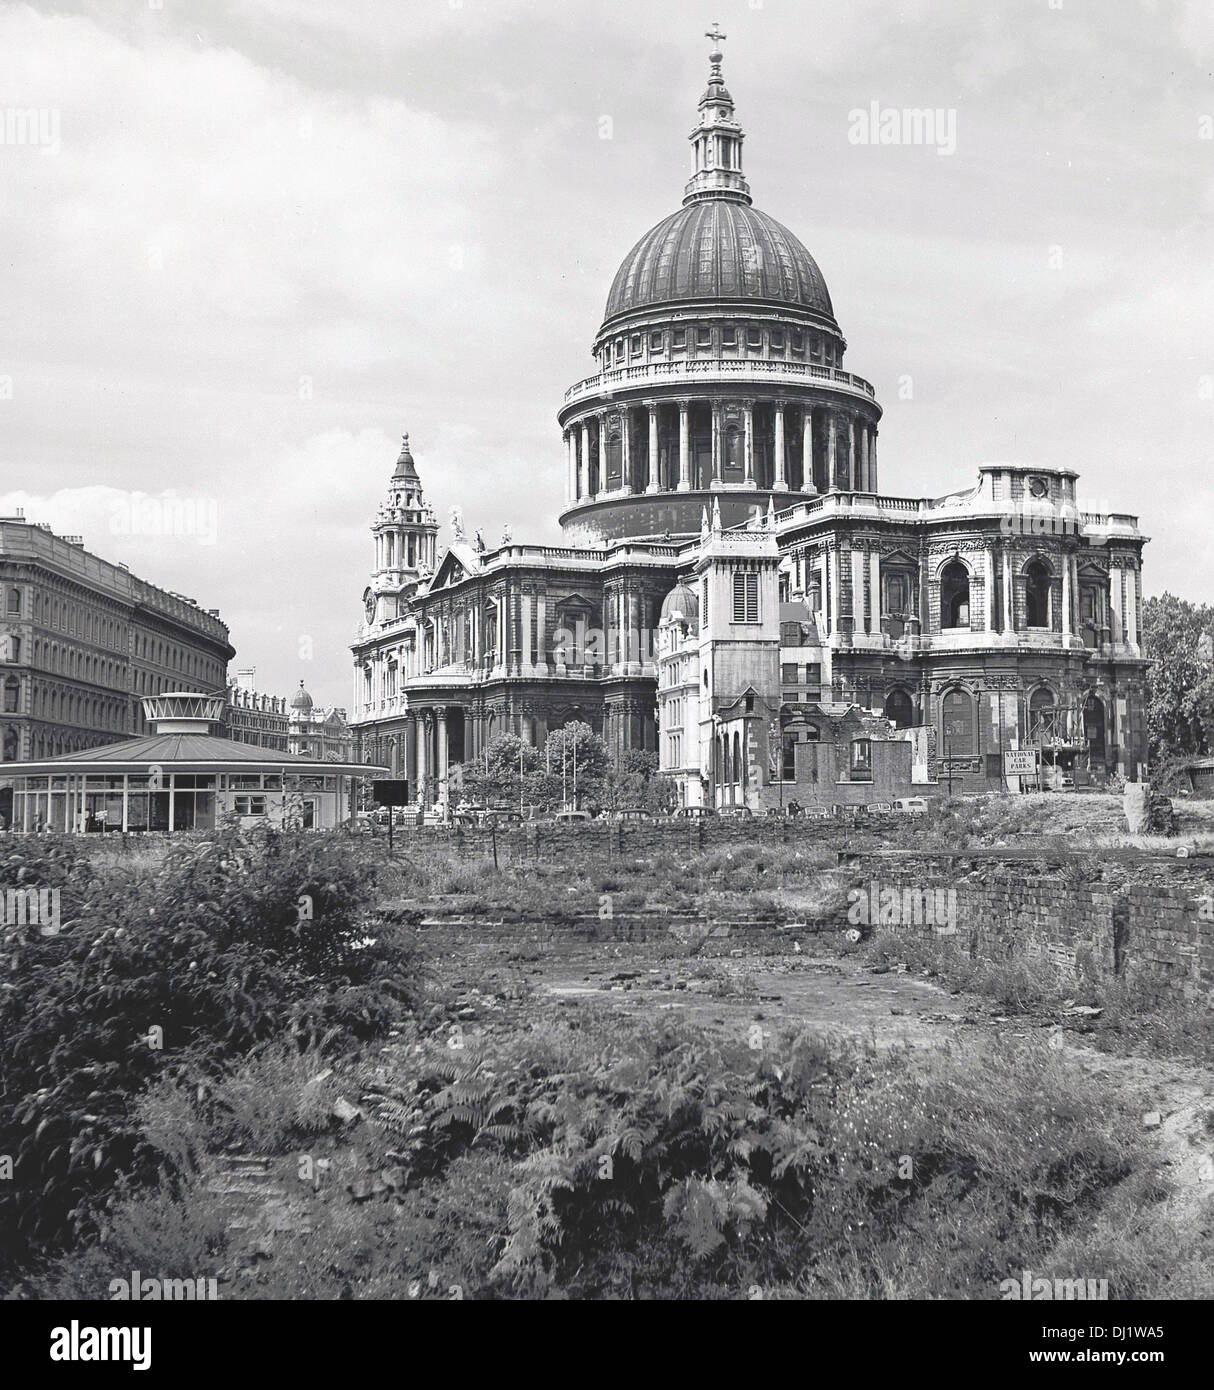 1950s, Historical picture of the exterior of St Paul's Cathedral, London and showing an area of rough ground from WW2 bomb damage next to it. The seat of the Bishop of London, it was designed by Sir Christopher Wren. Stock Photo